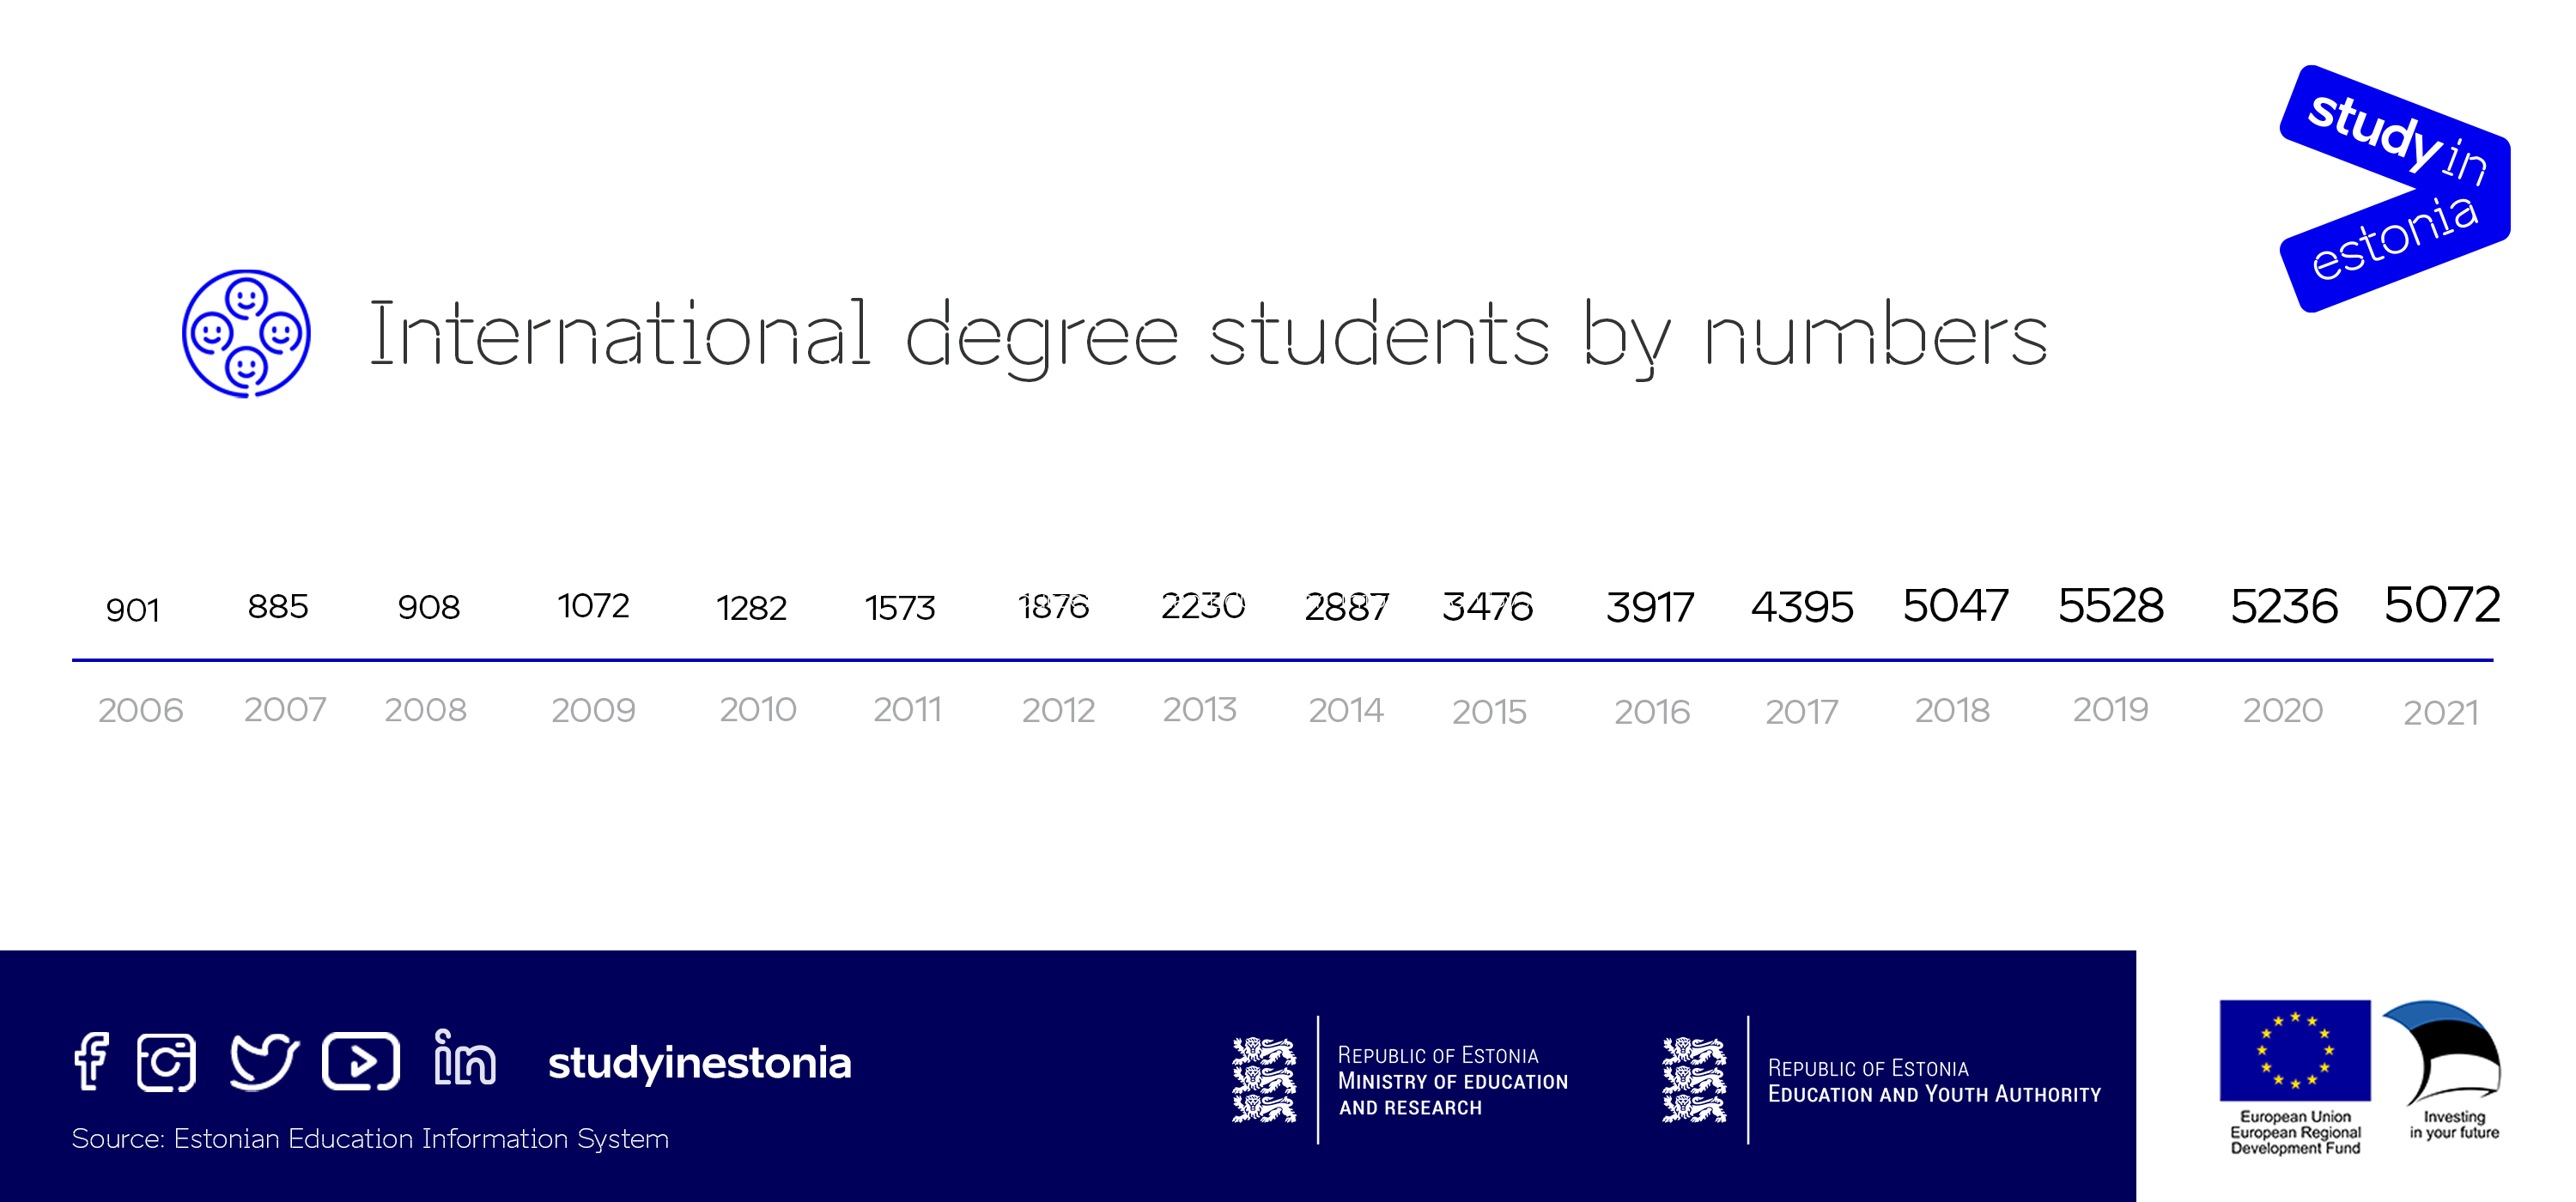 International degree students by number